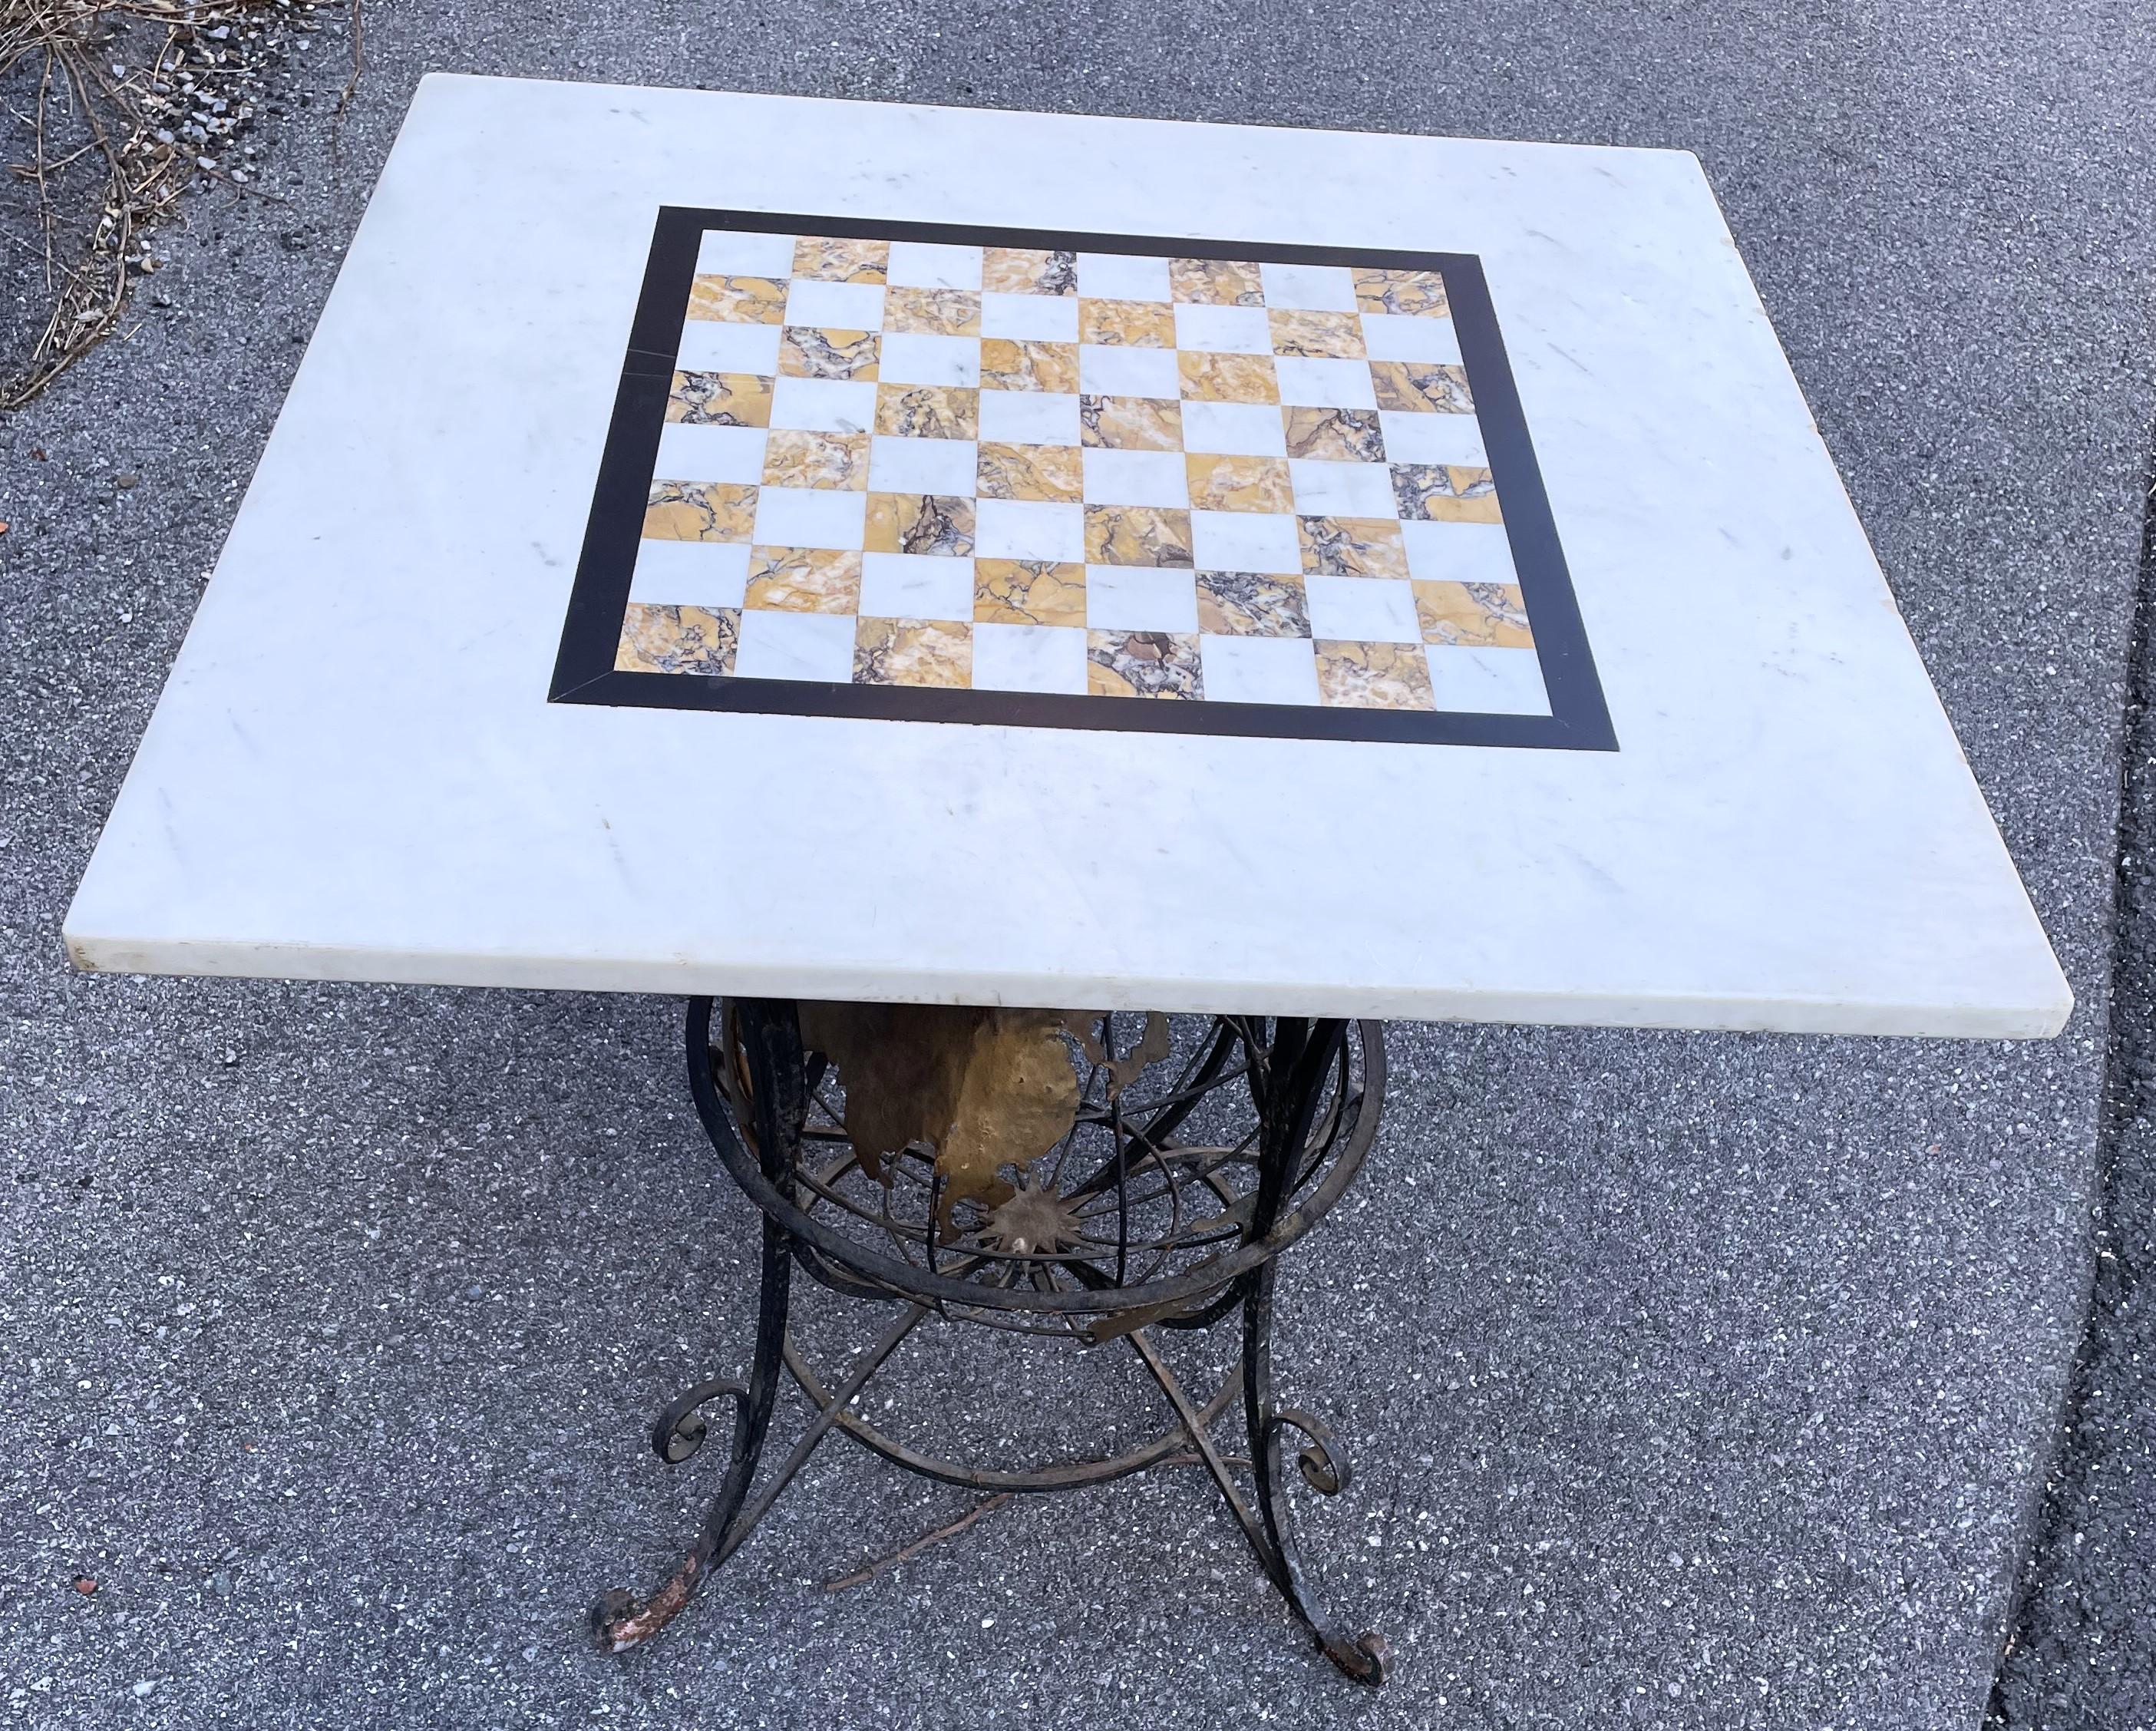 Inlay Wrought Iron World Globe Centered Table w/ Inlaid Marble Chess Board Top  For Sale